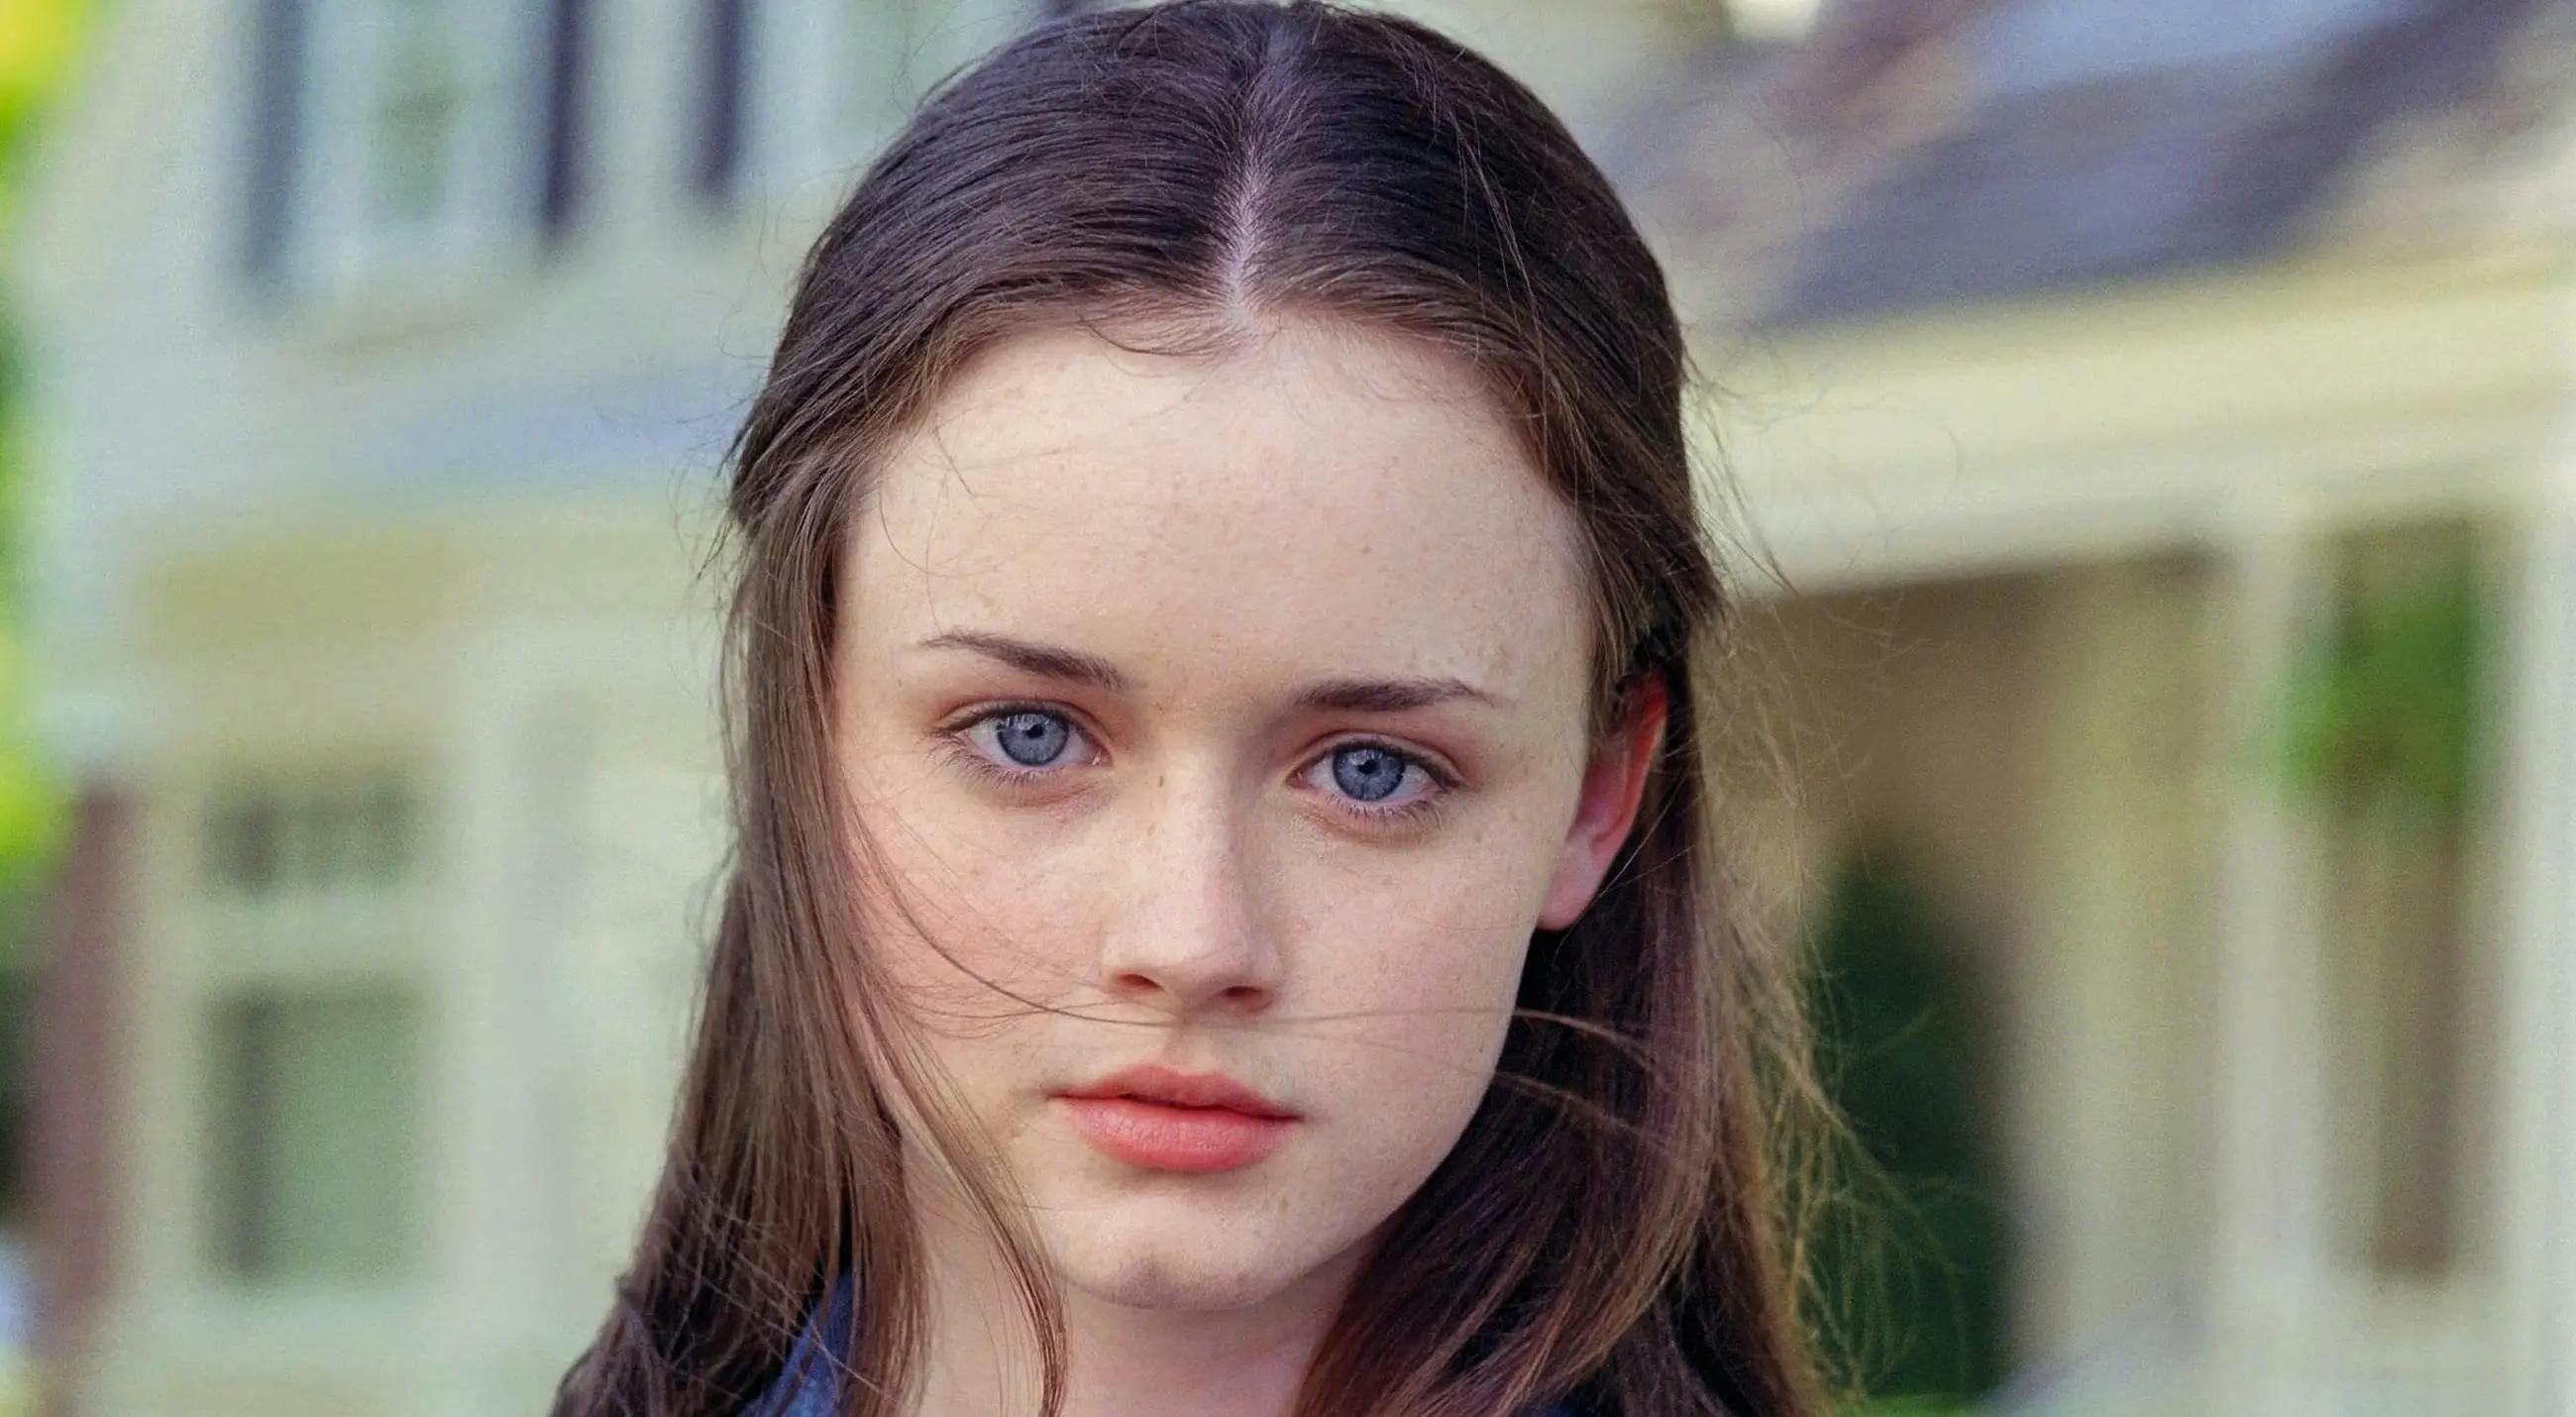 Personality type of Rory Gilmore 